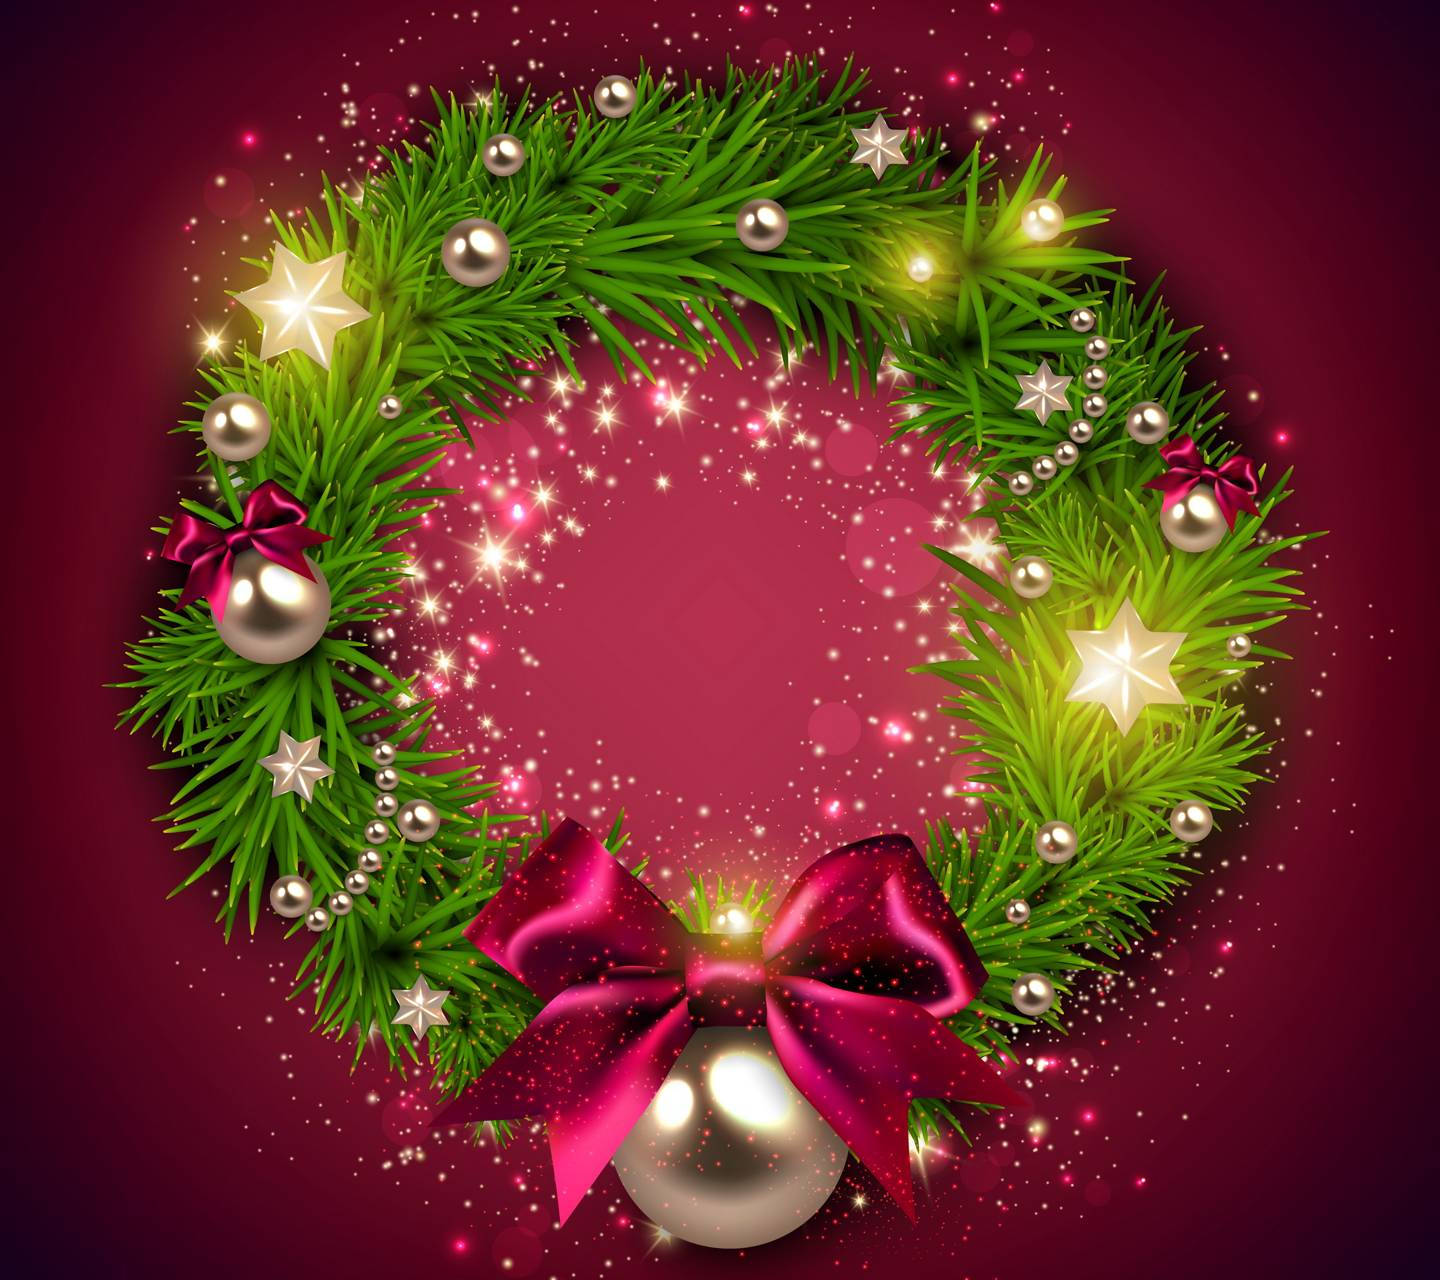 Caption: Glorious Christmas Wreath With Purple Ribbon Background